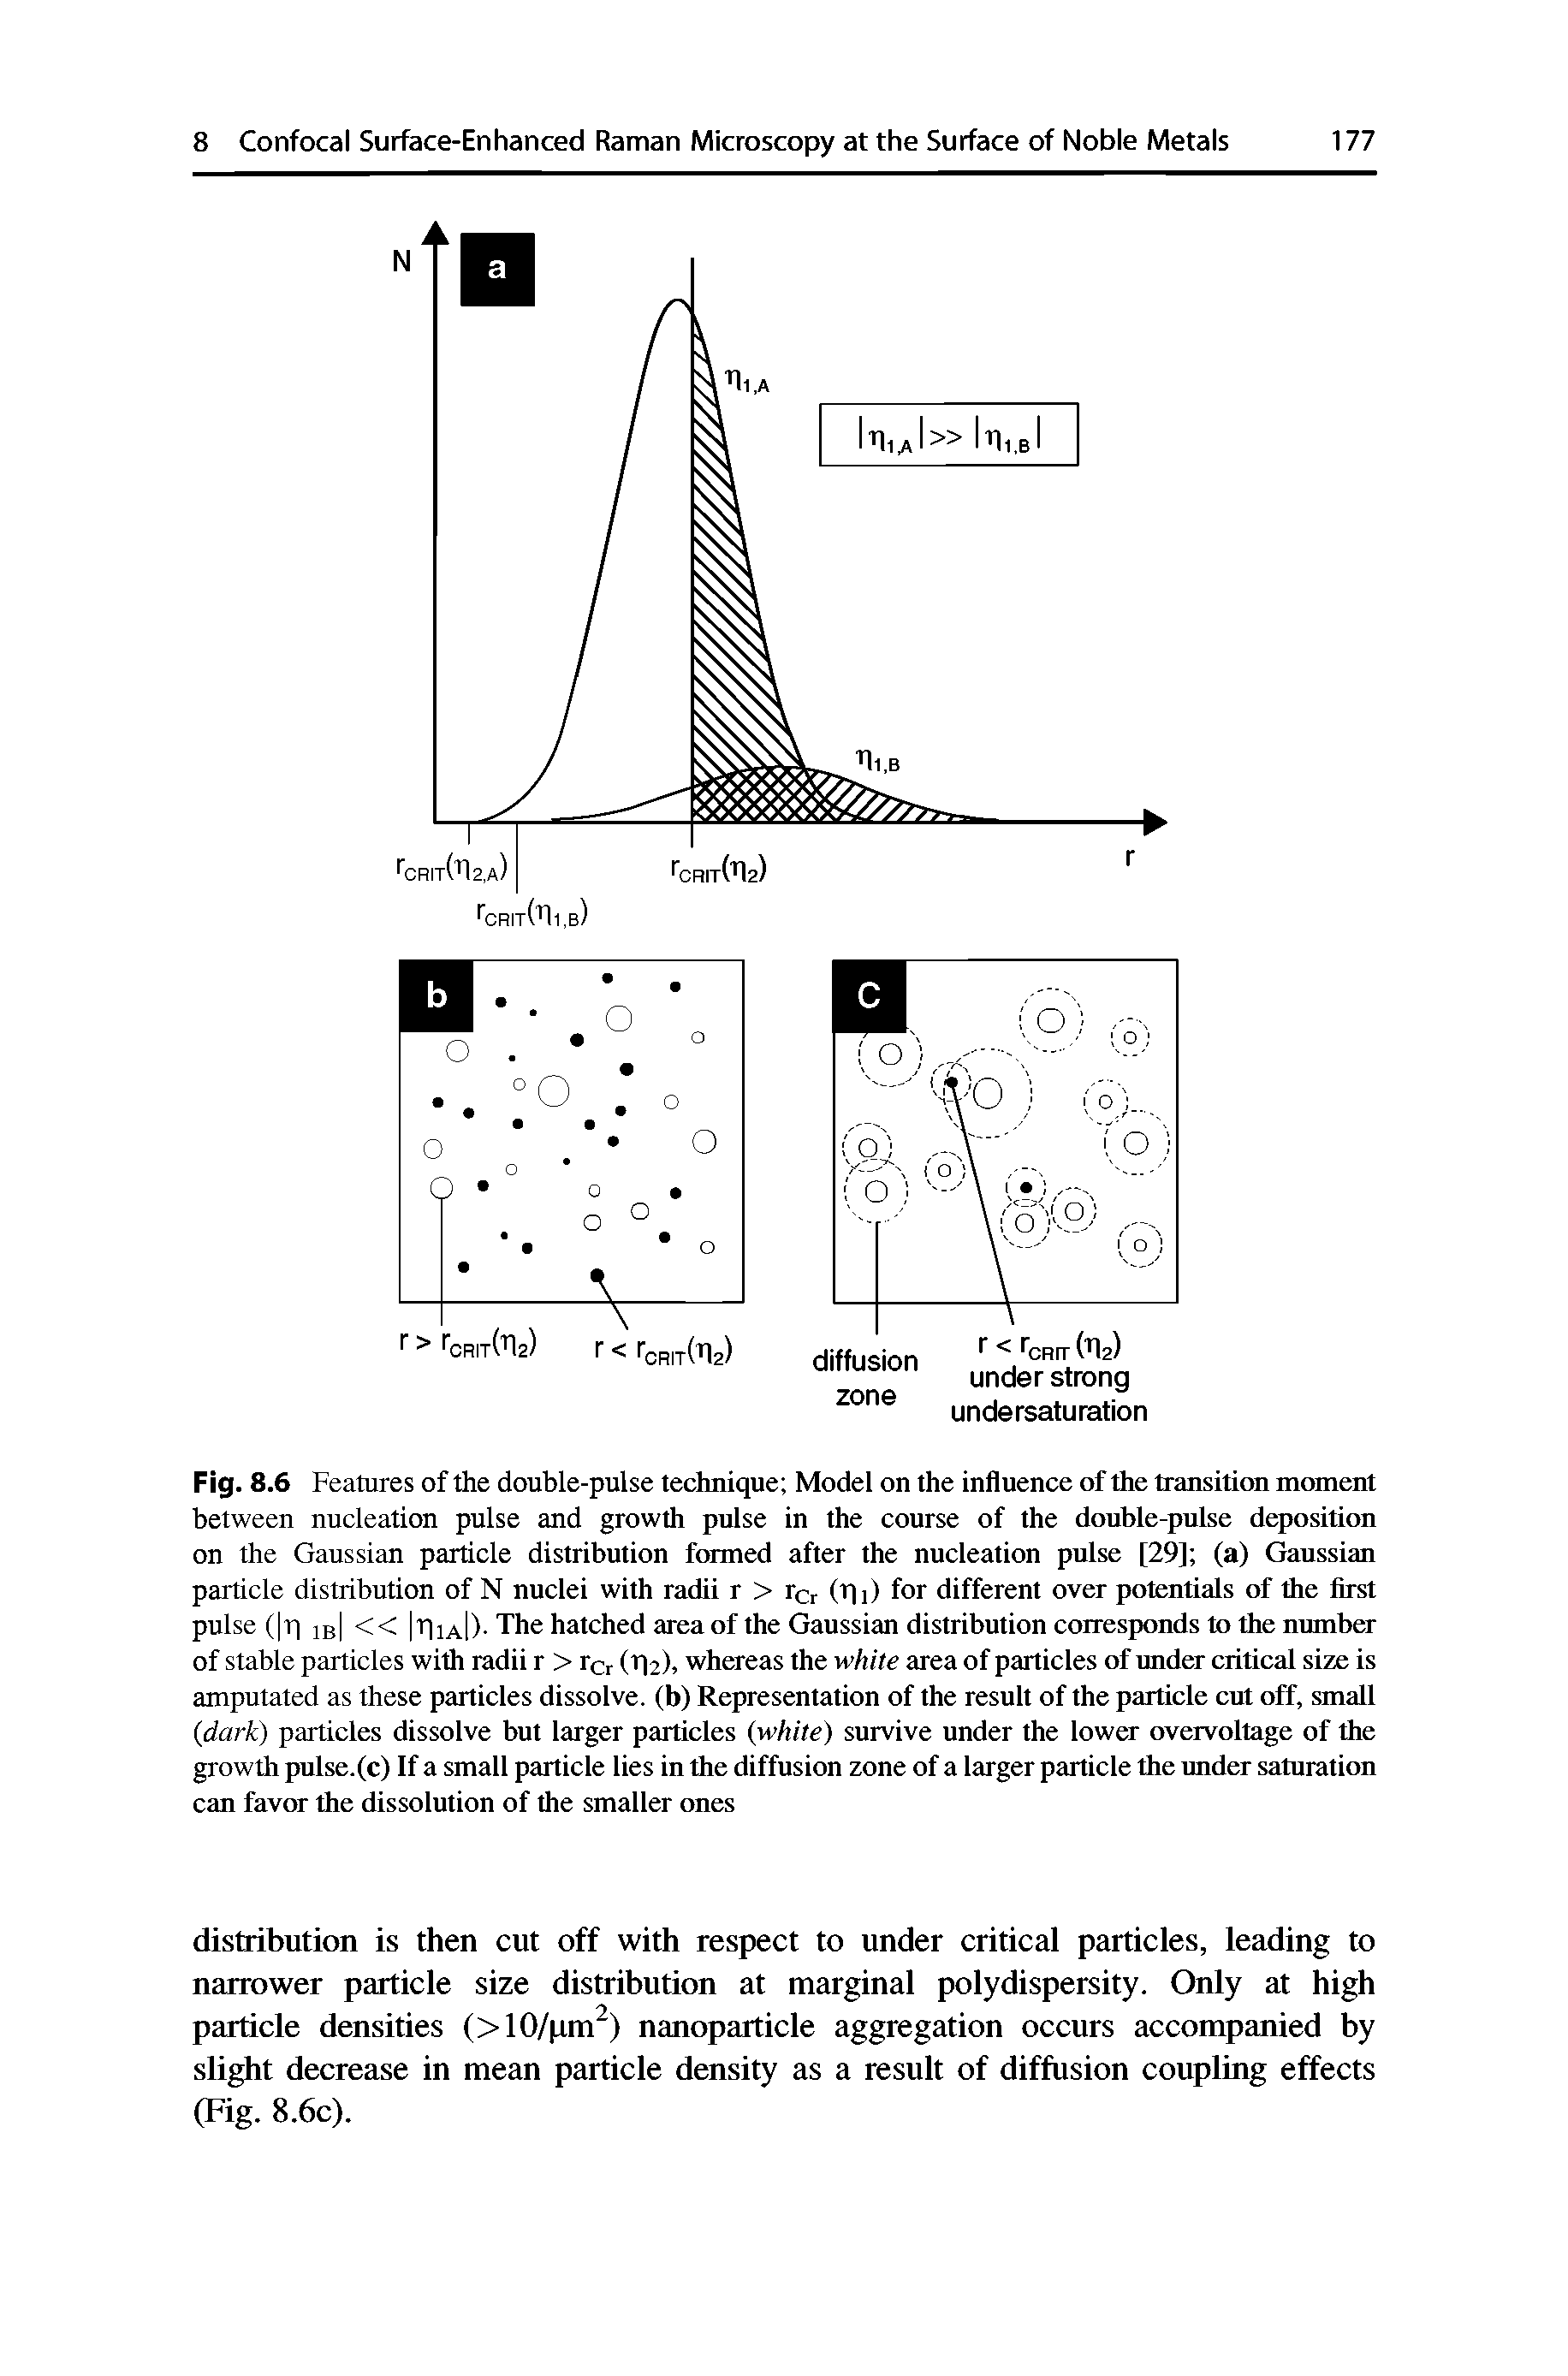 Fig. 8.6 Features of the double-pulse technique Model on the influence of the transition moment between nucleation pulse and growth pulse in the course of the double-pulse deposition on the Gaussian particle distribution formed after the nucleation pulse [29] (a) Gaussian particle distribution of N nuclei with radii r > tcr (T)i) for different over potentials of the first pulse ( t ib << t iAl)- The hatched area of the Gaussian distribution corresponds to the number of stable particles with radii r > rcr (tje). whereas the white area of particles of under critical size is amputated as these particles dissolve, (b) Representation of the result of the particle cut off, small (dark) particles dissolve but larger particles (white) survive under the lower overvoltage of the growth pulse.(c) If a small particle lies in the diffusion zone of a larger particle the under saturation can favor the dissolution of the smaller ones...